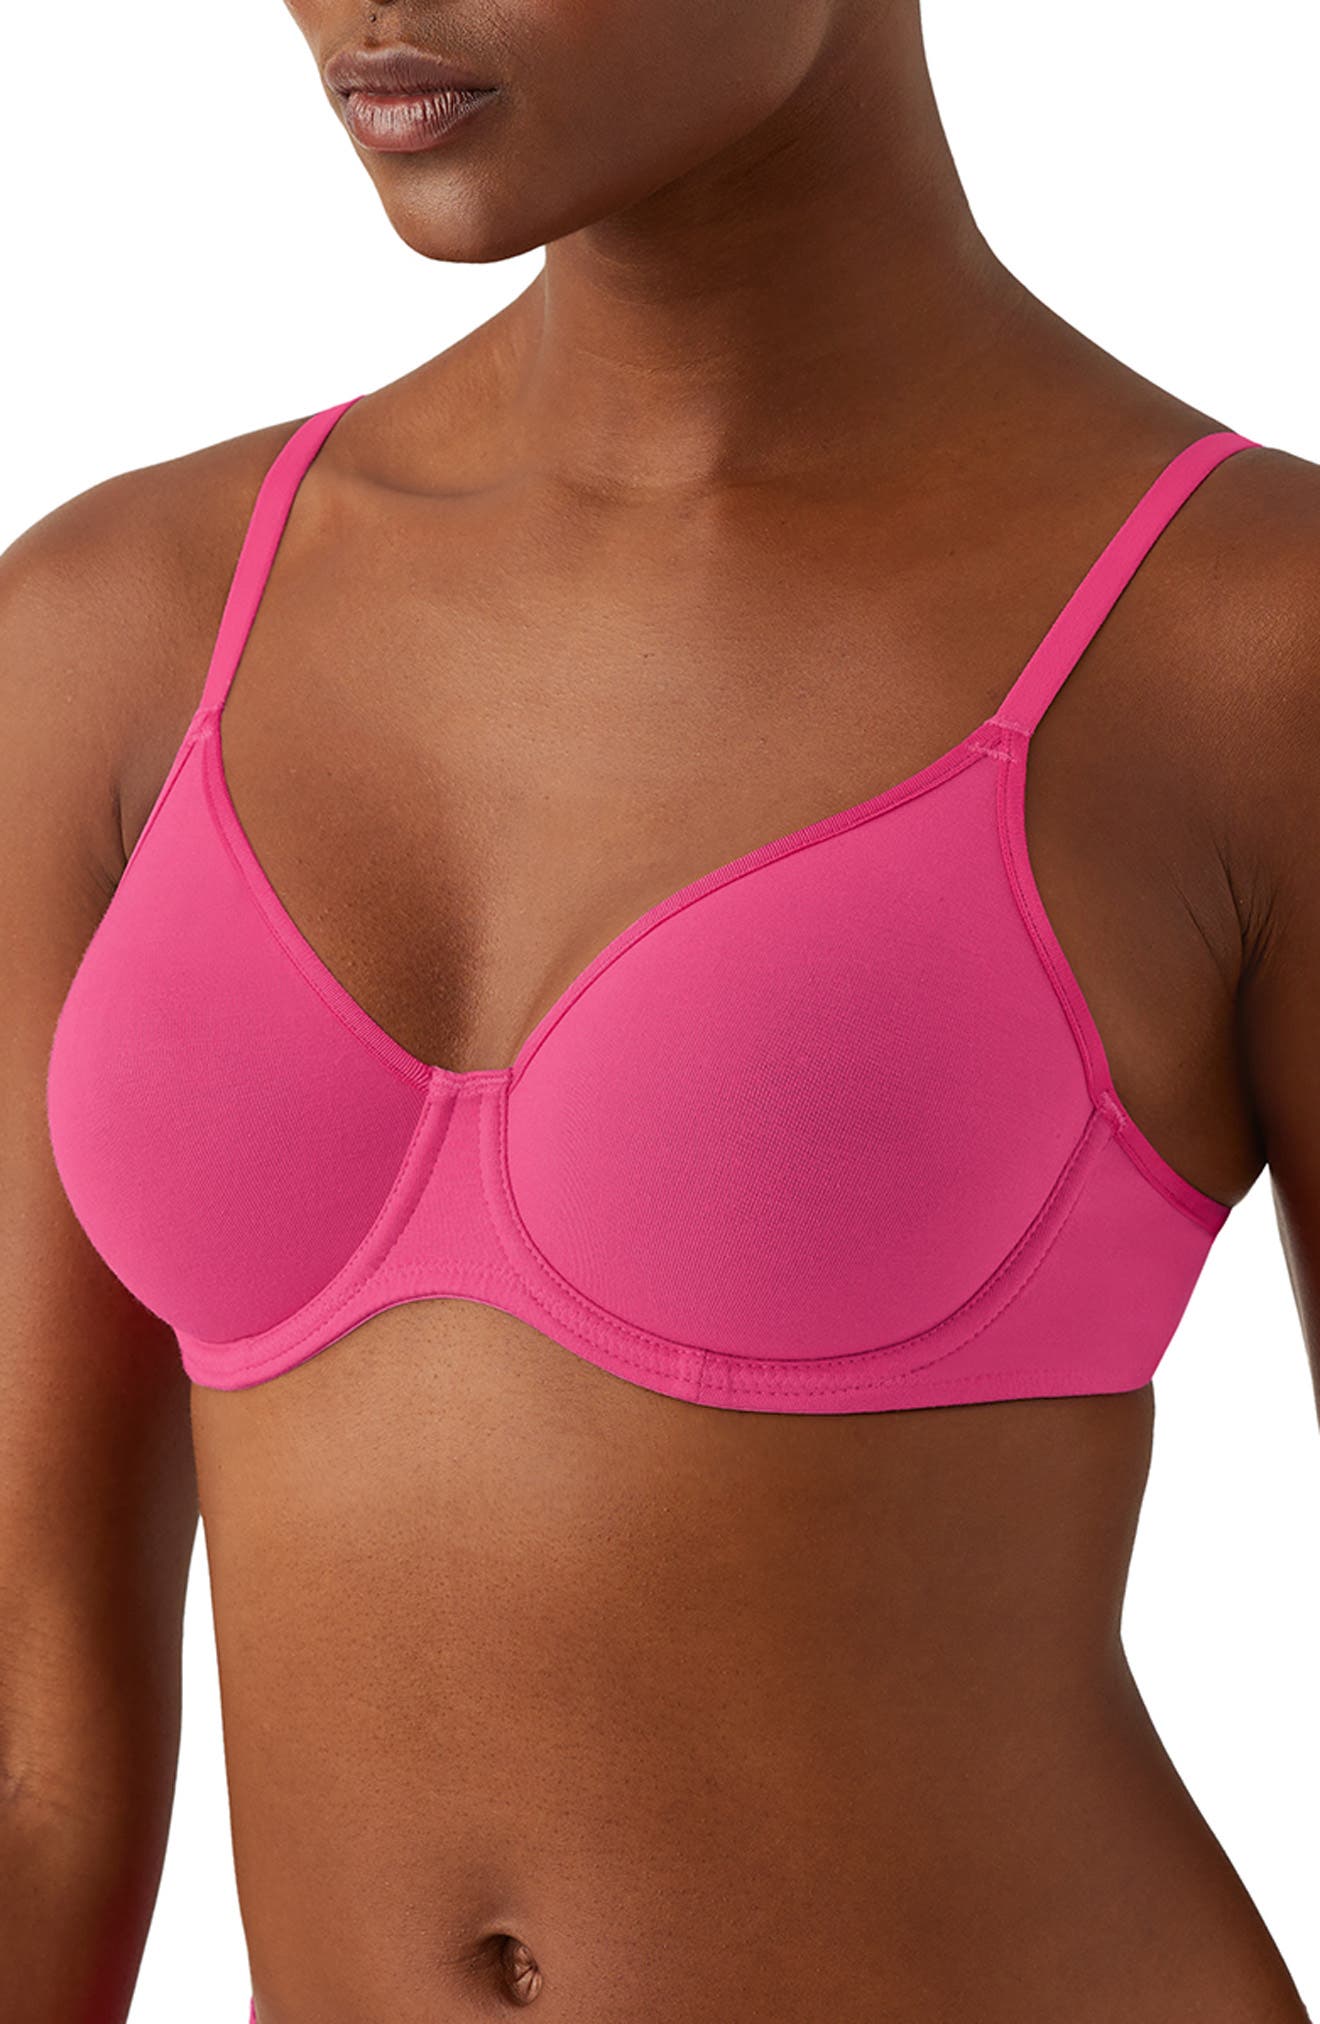 b.tempt'd by Wacoal Cotton to a Tee Underwire Plunge T-Shirt Bra